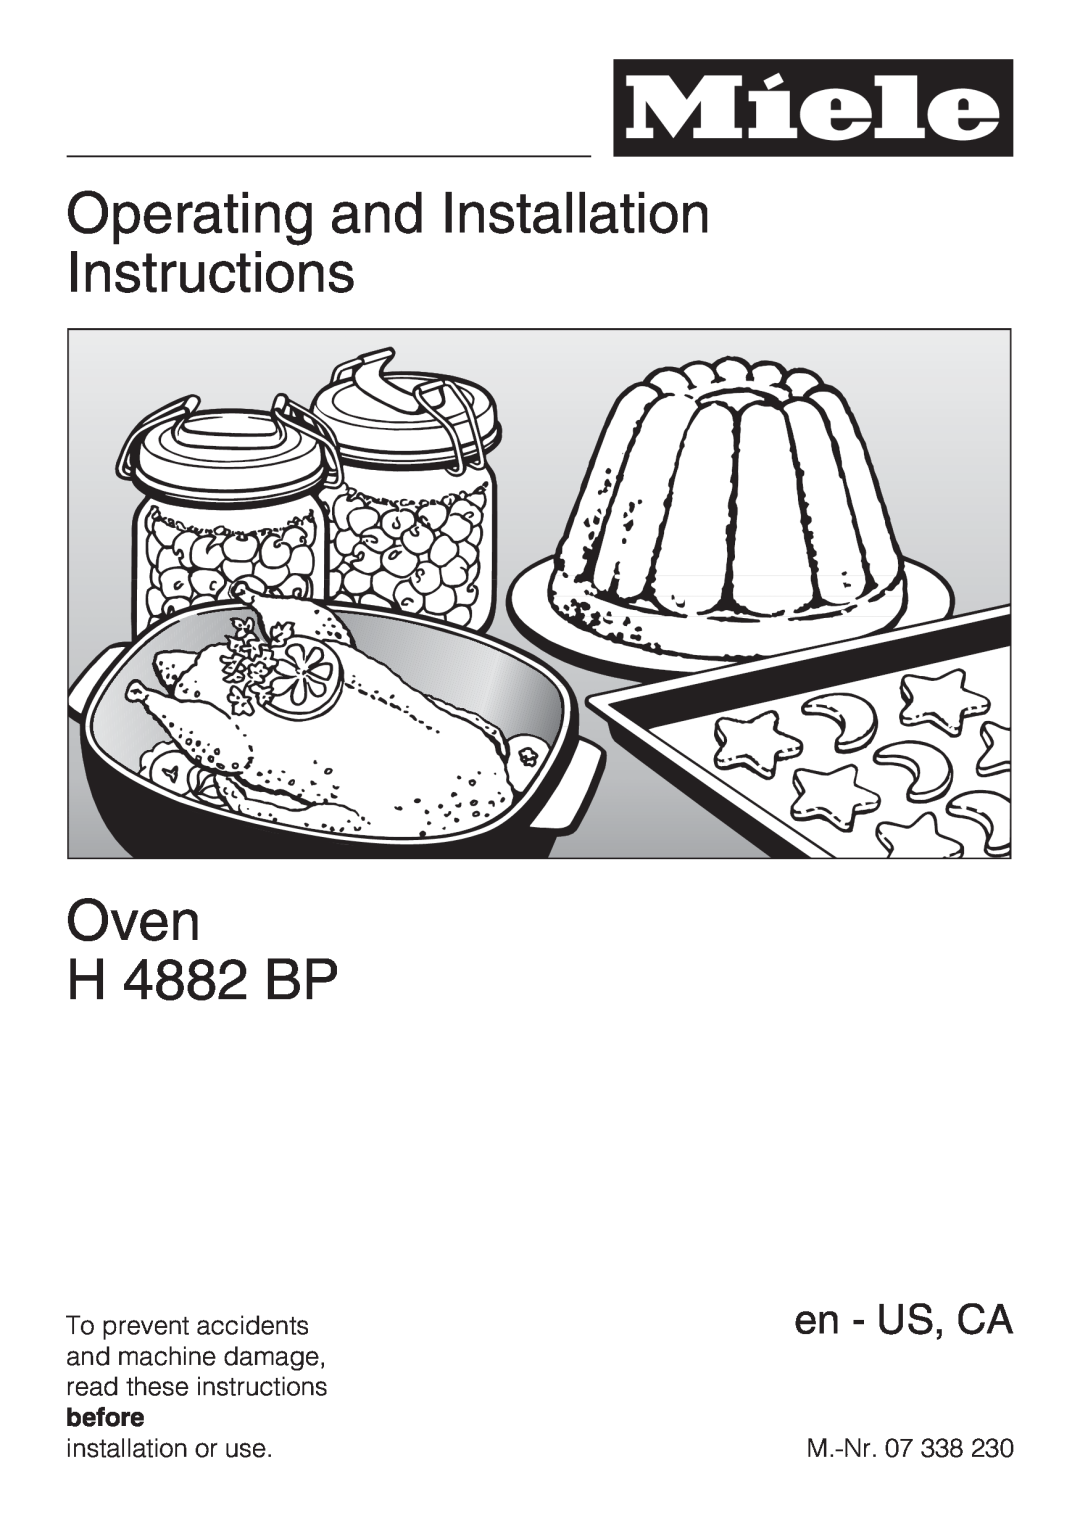 Miele H4882BP installation instructions Operating and Installation Instructions Oven, H 4882 BP, en - US, CA 